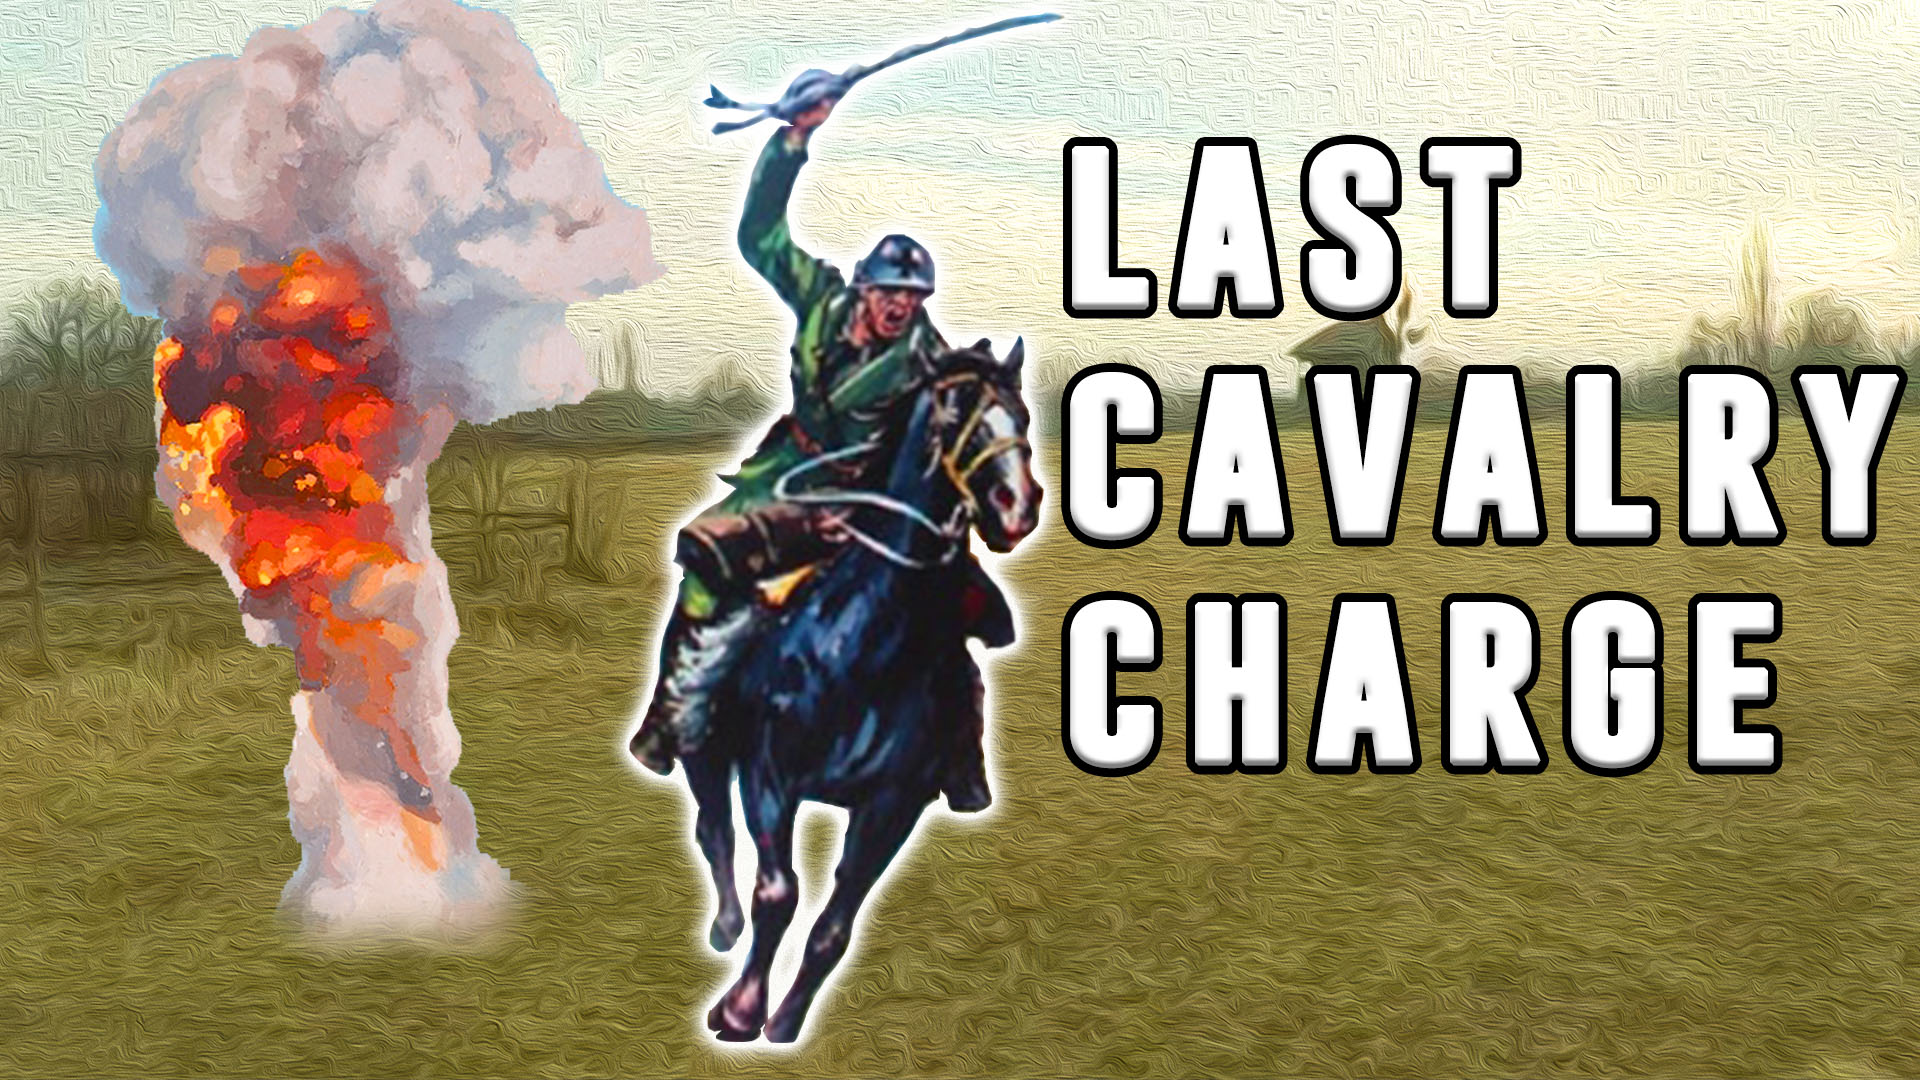 How the Last Major Cavalry Charge Ended